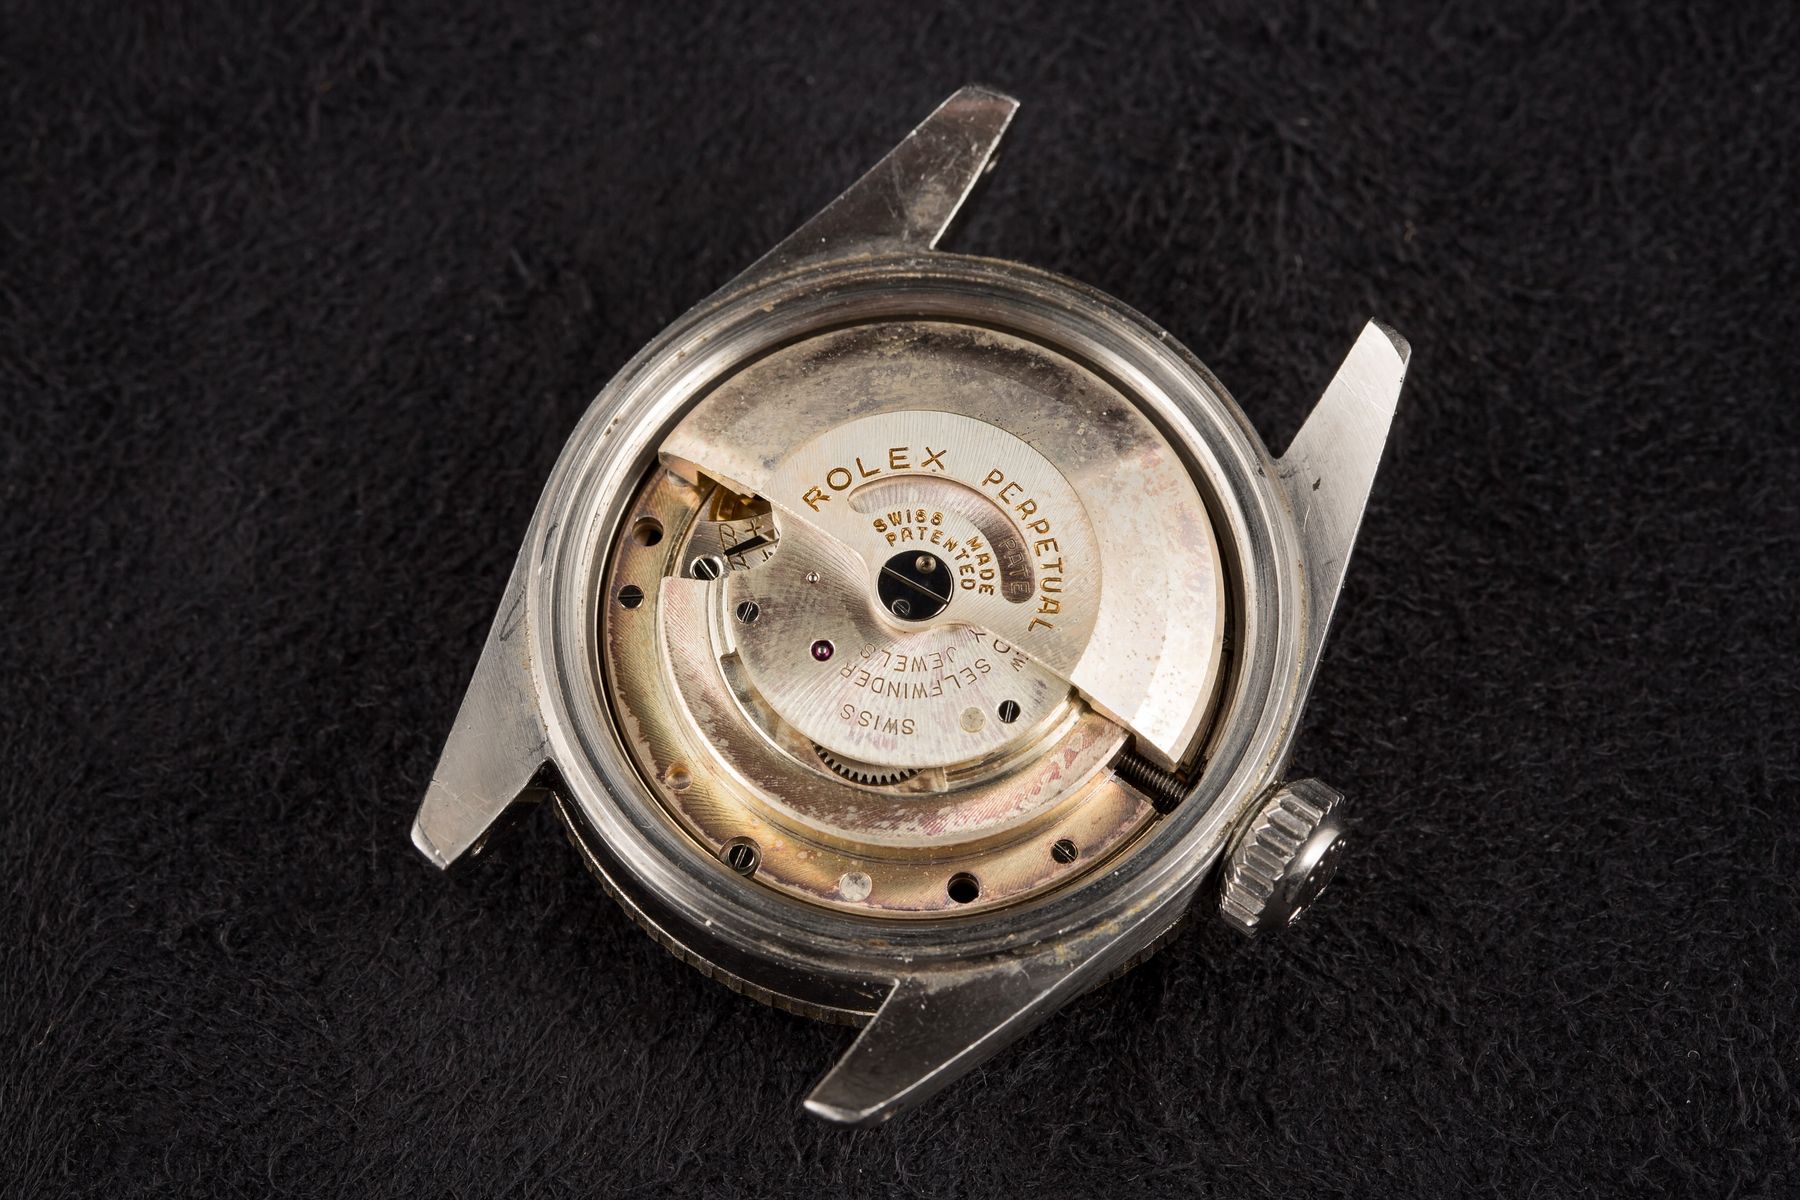 Vintage Rolex Oyster Perpetual Movement Caliber 1030